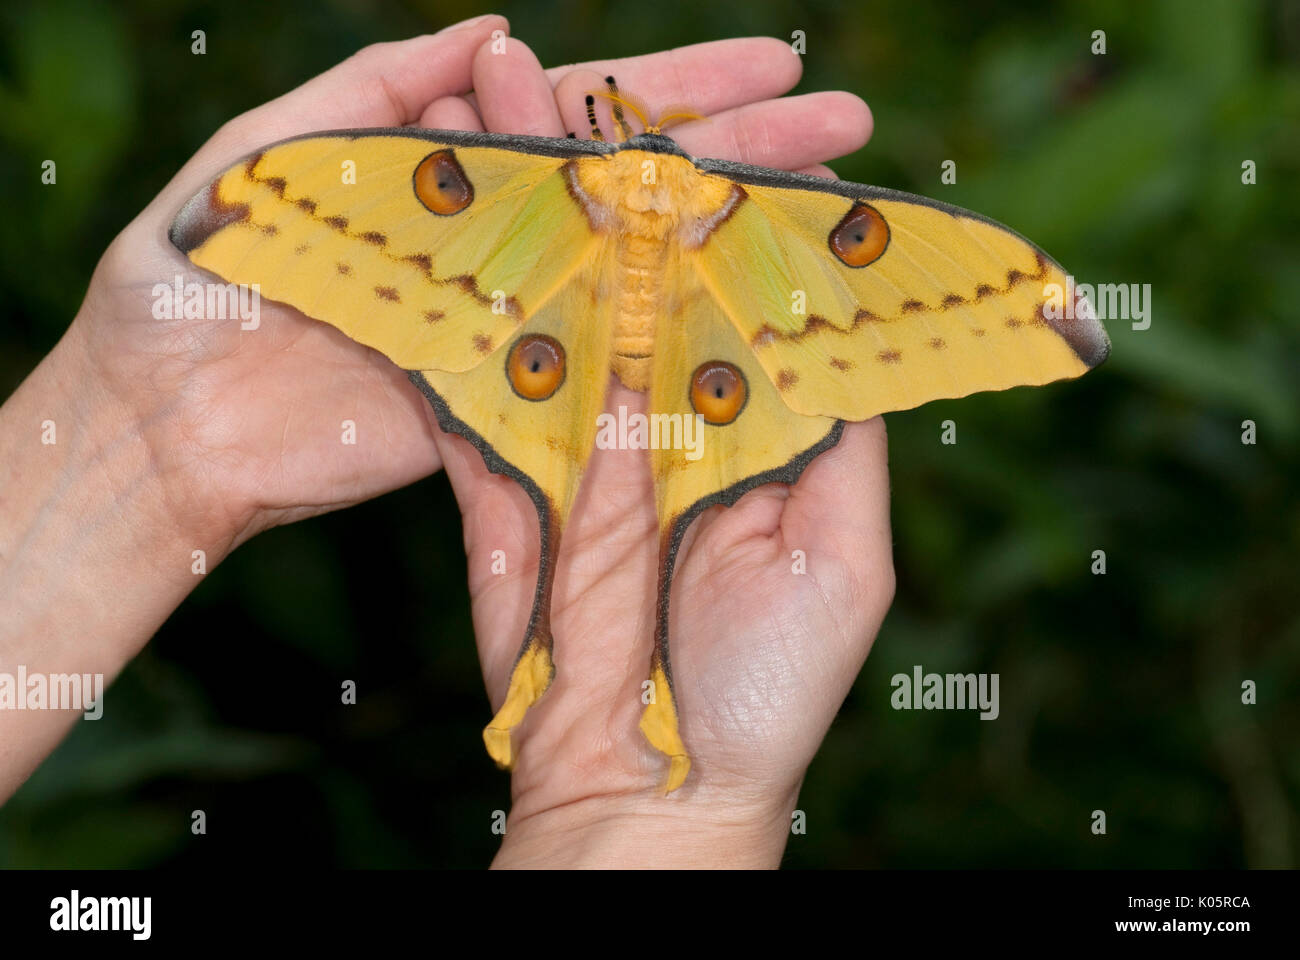 Giant Comet Moth, Argema mittrei, Madagascar, Moon or Lunar, Family: Saturniidae, one of the largest Silk Moths, hanging on hand Stock Photo